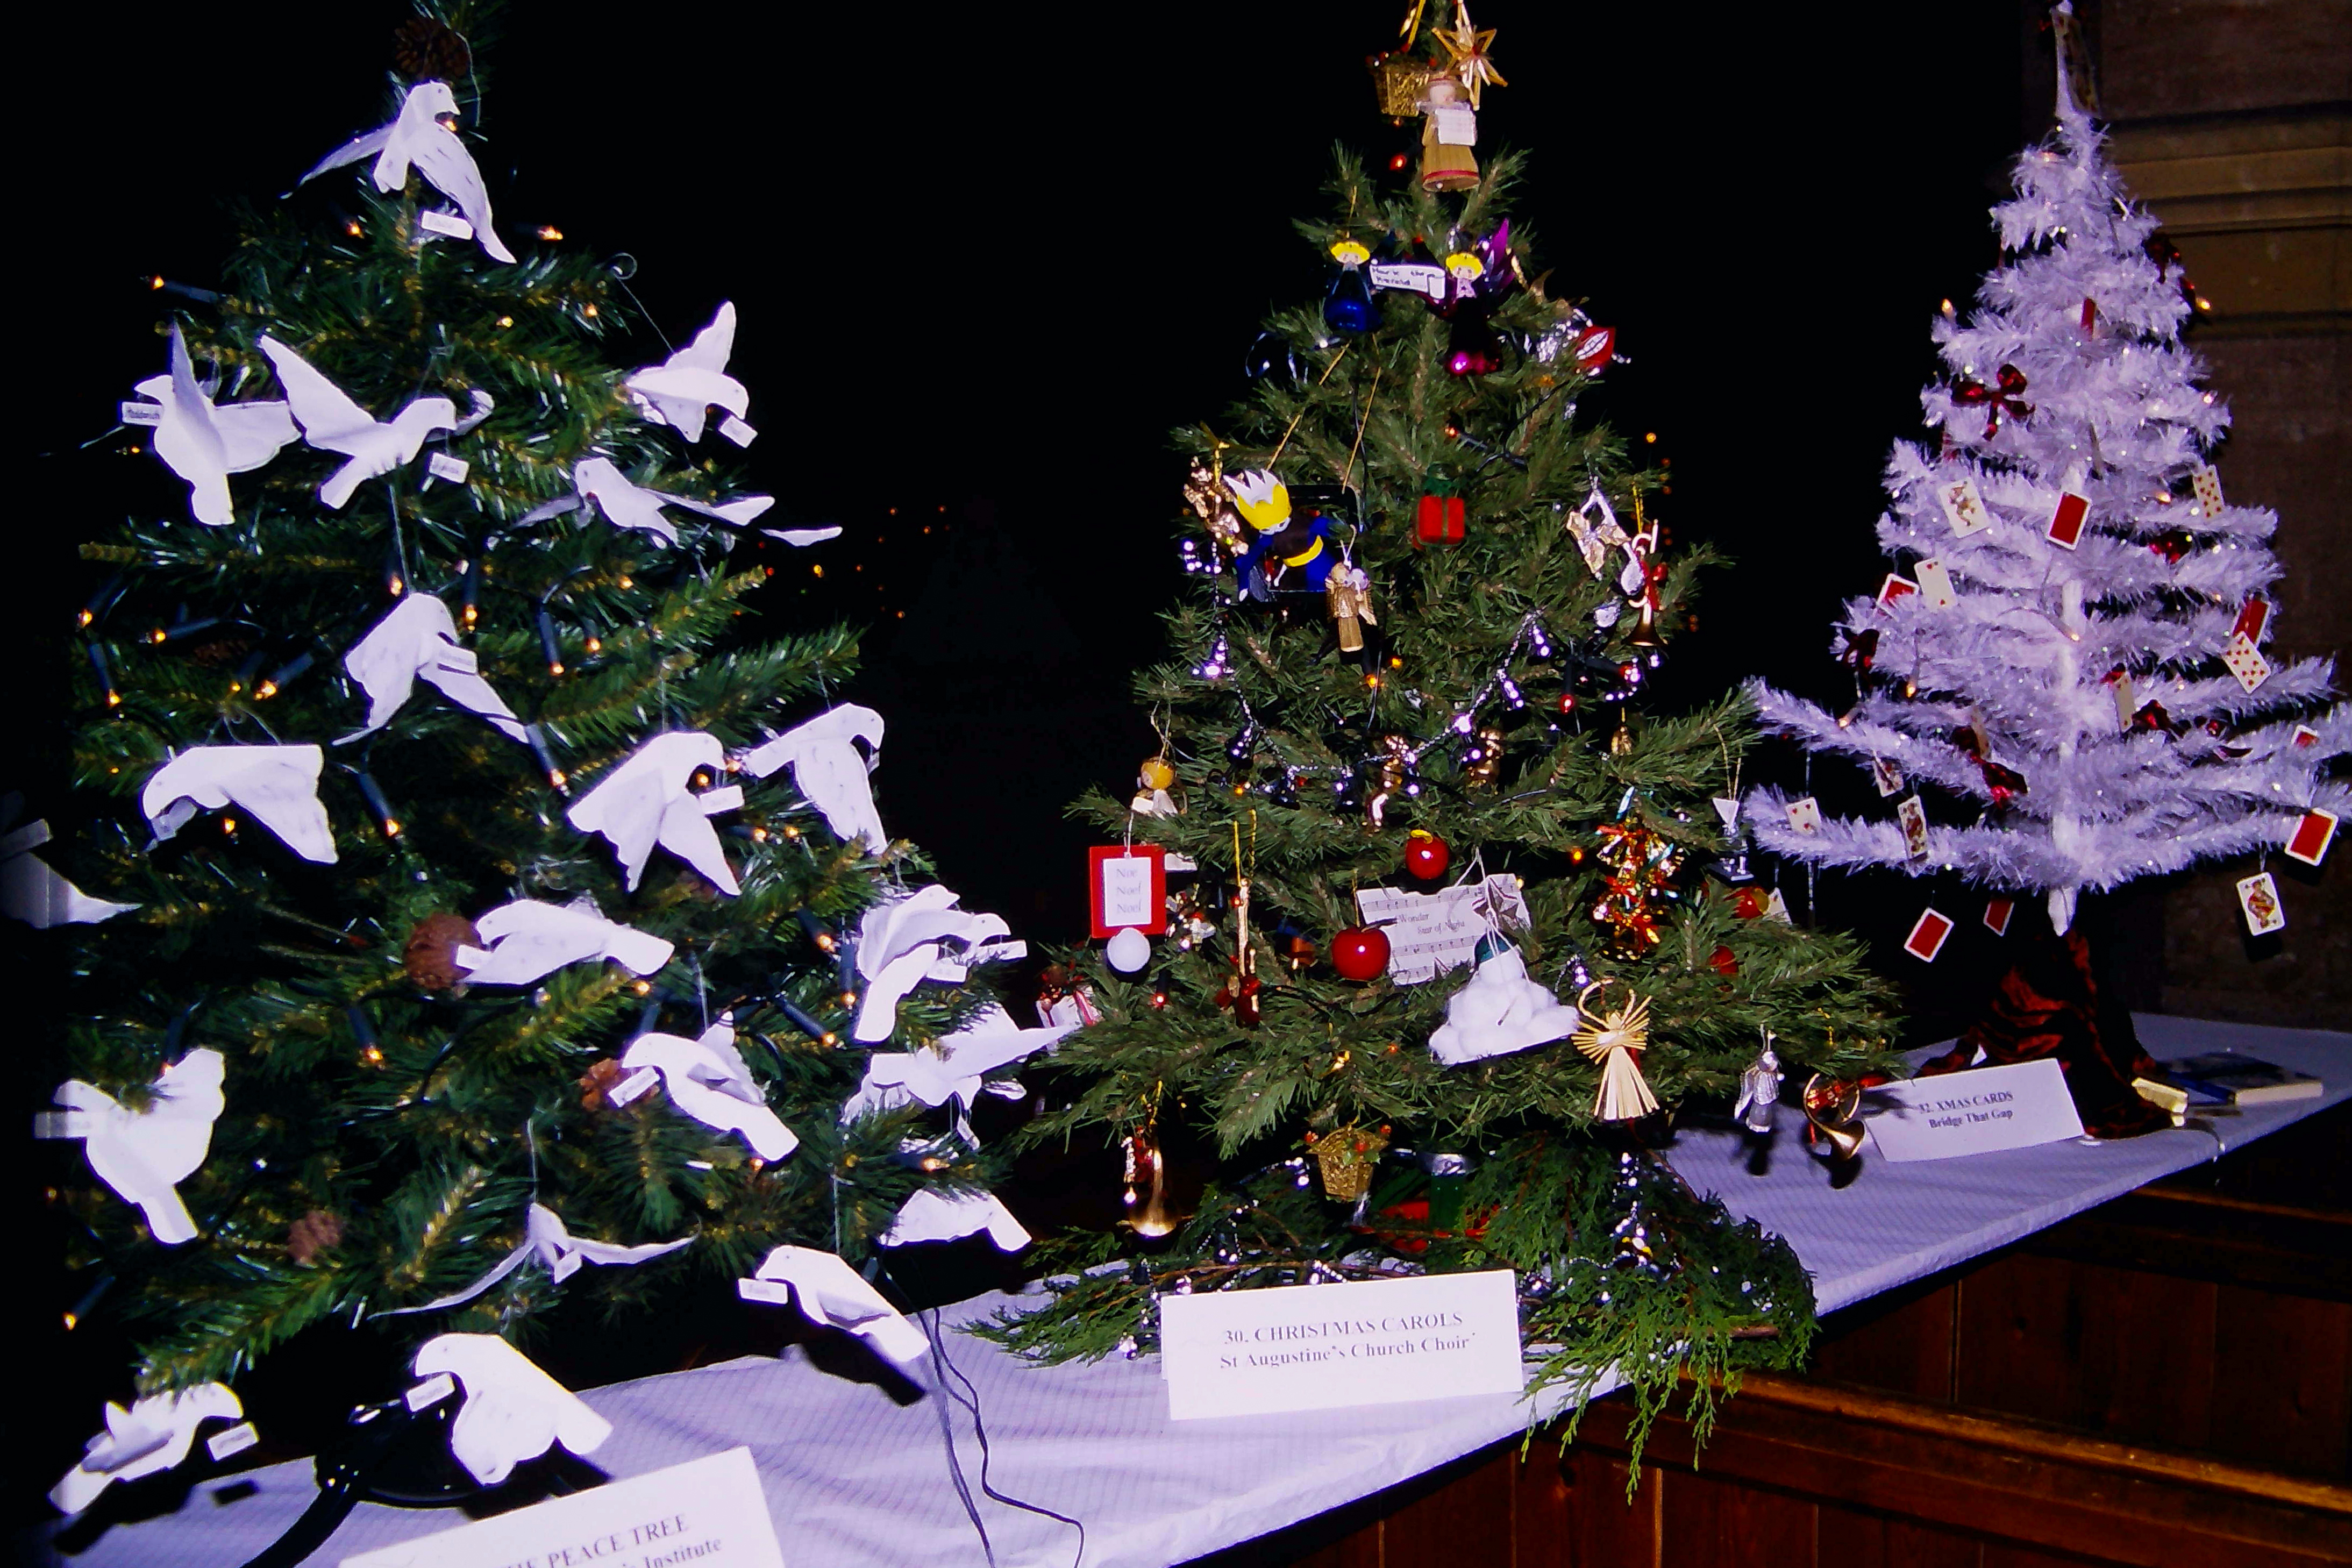 Christmas Trees from previous festivals